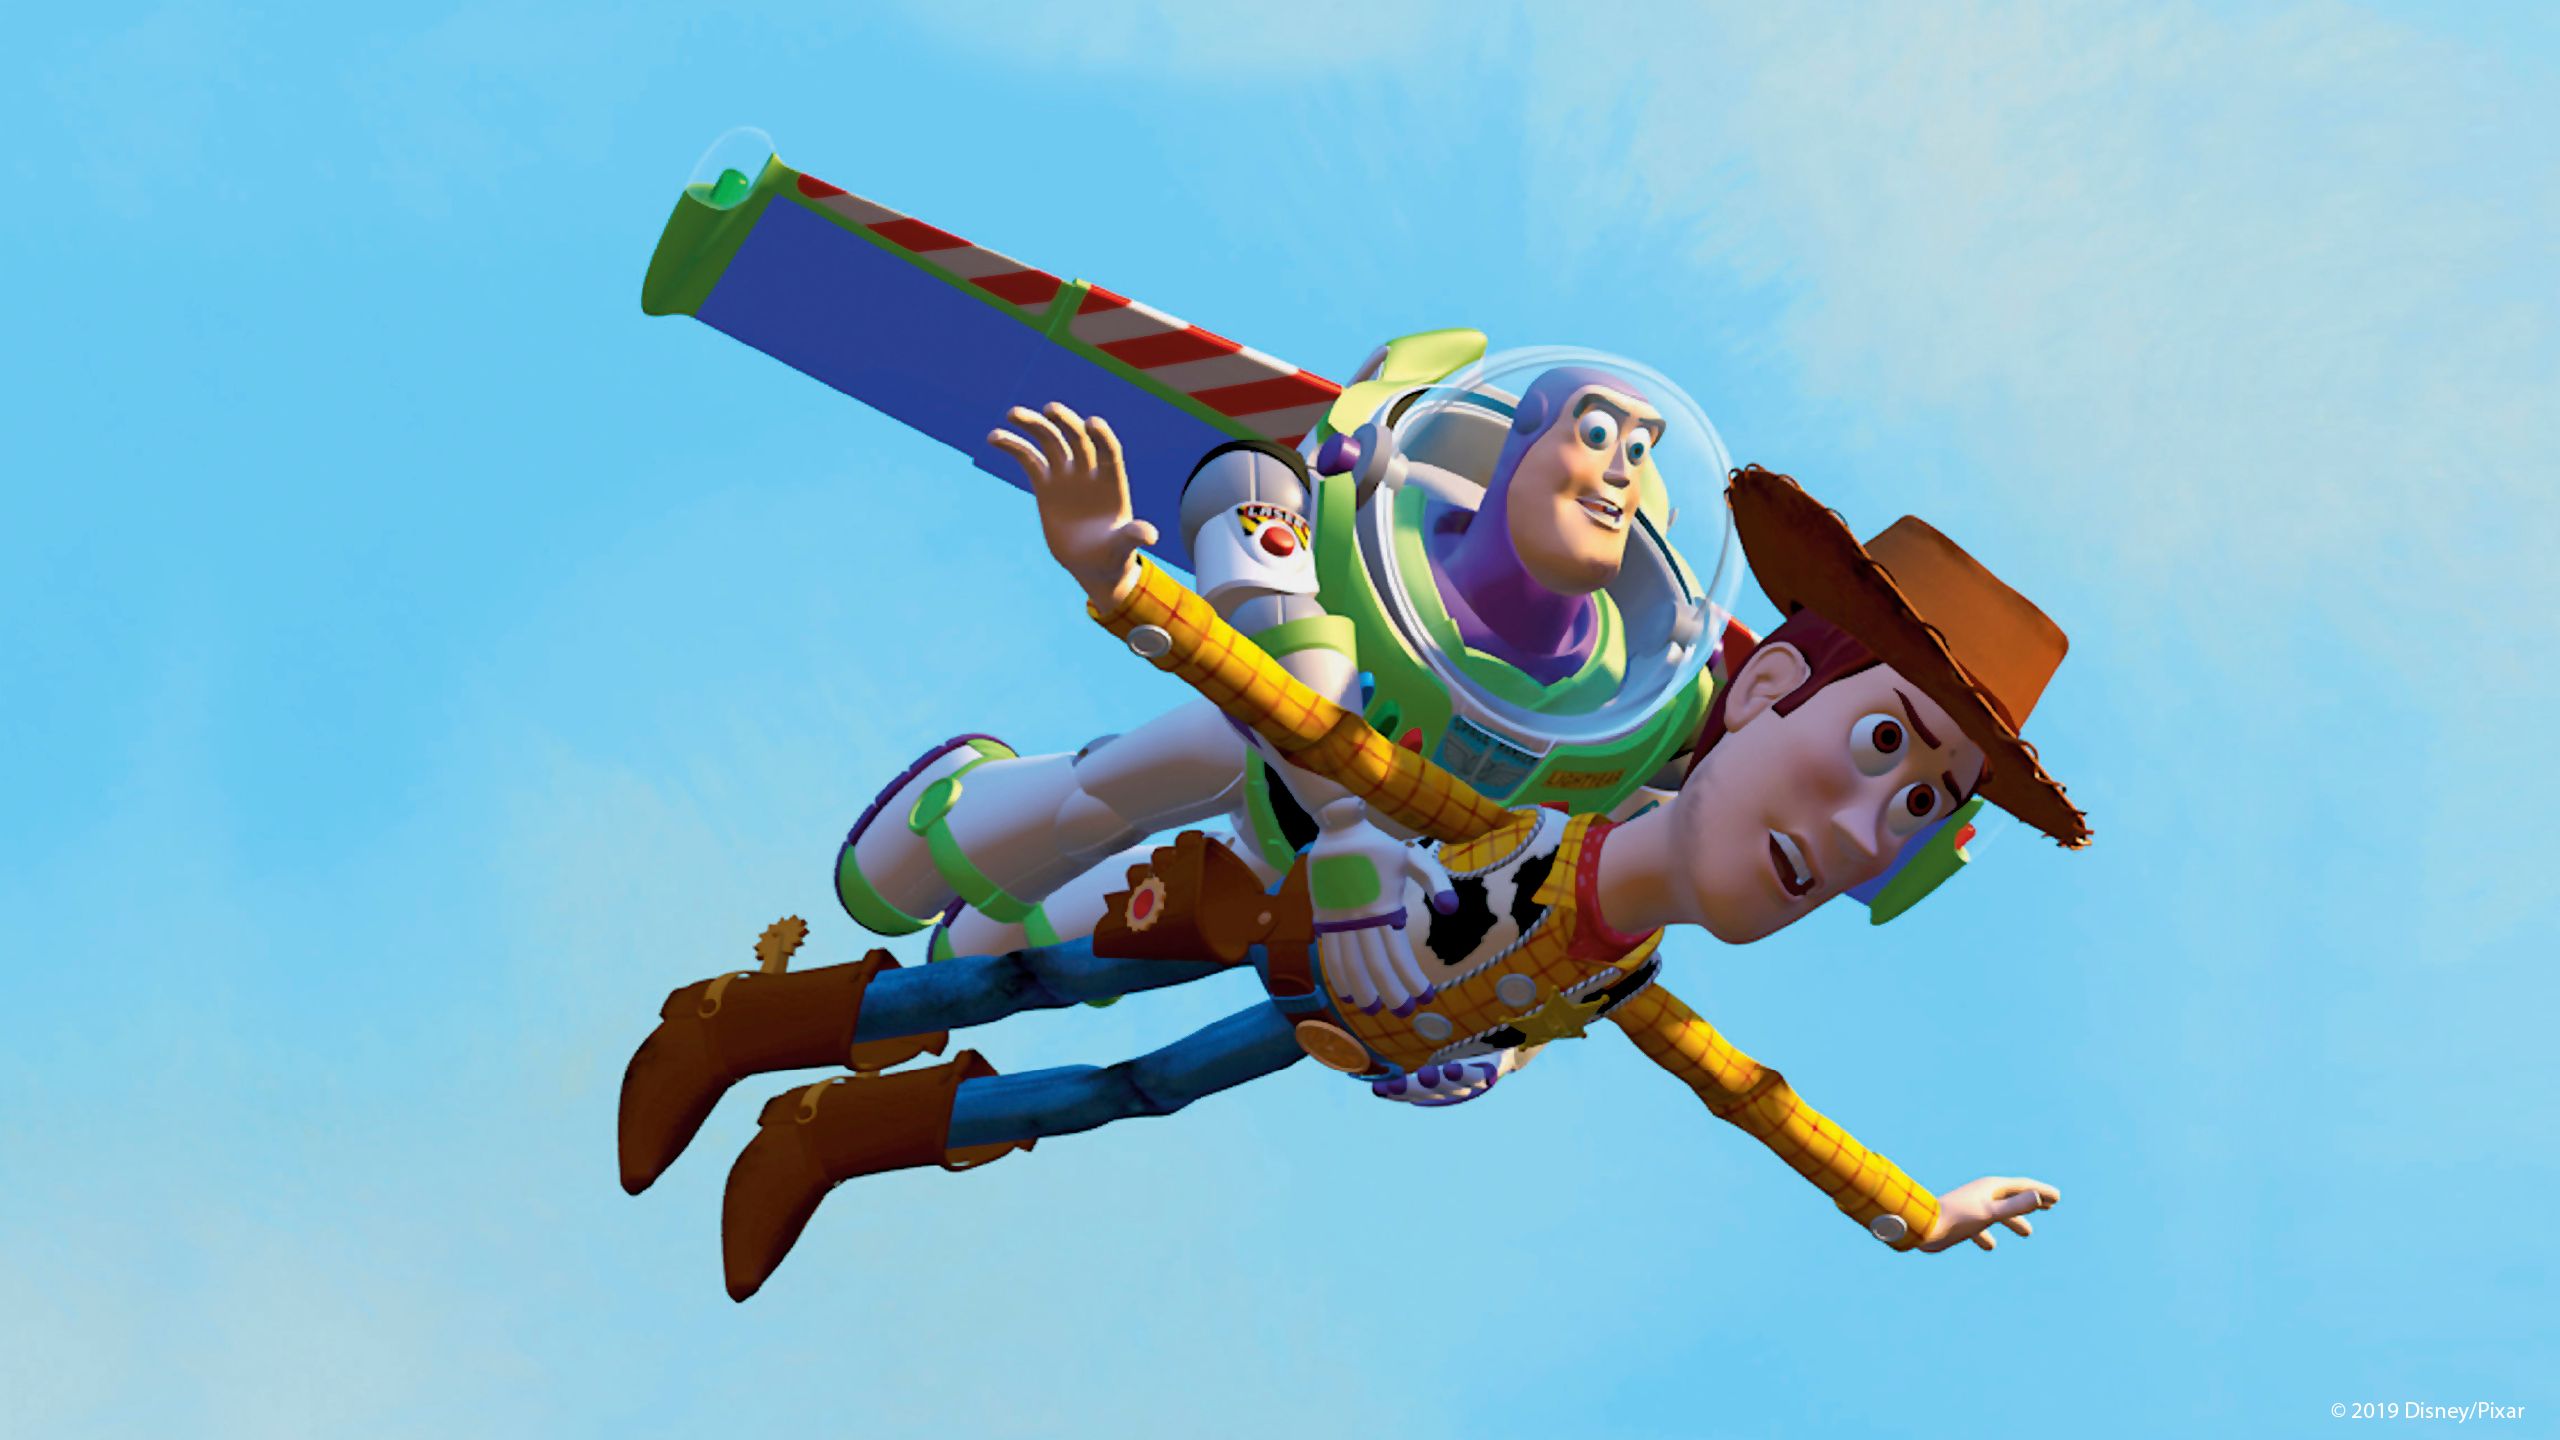 MONEY MAKERS MONEY MAKERS EVERYWHERE - Buzz and Woody (Toy Story